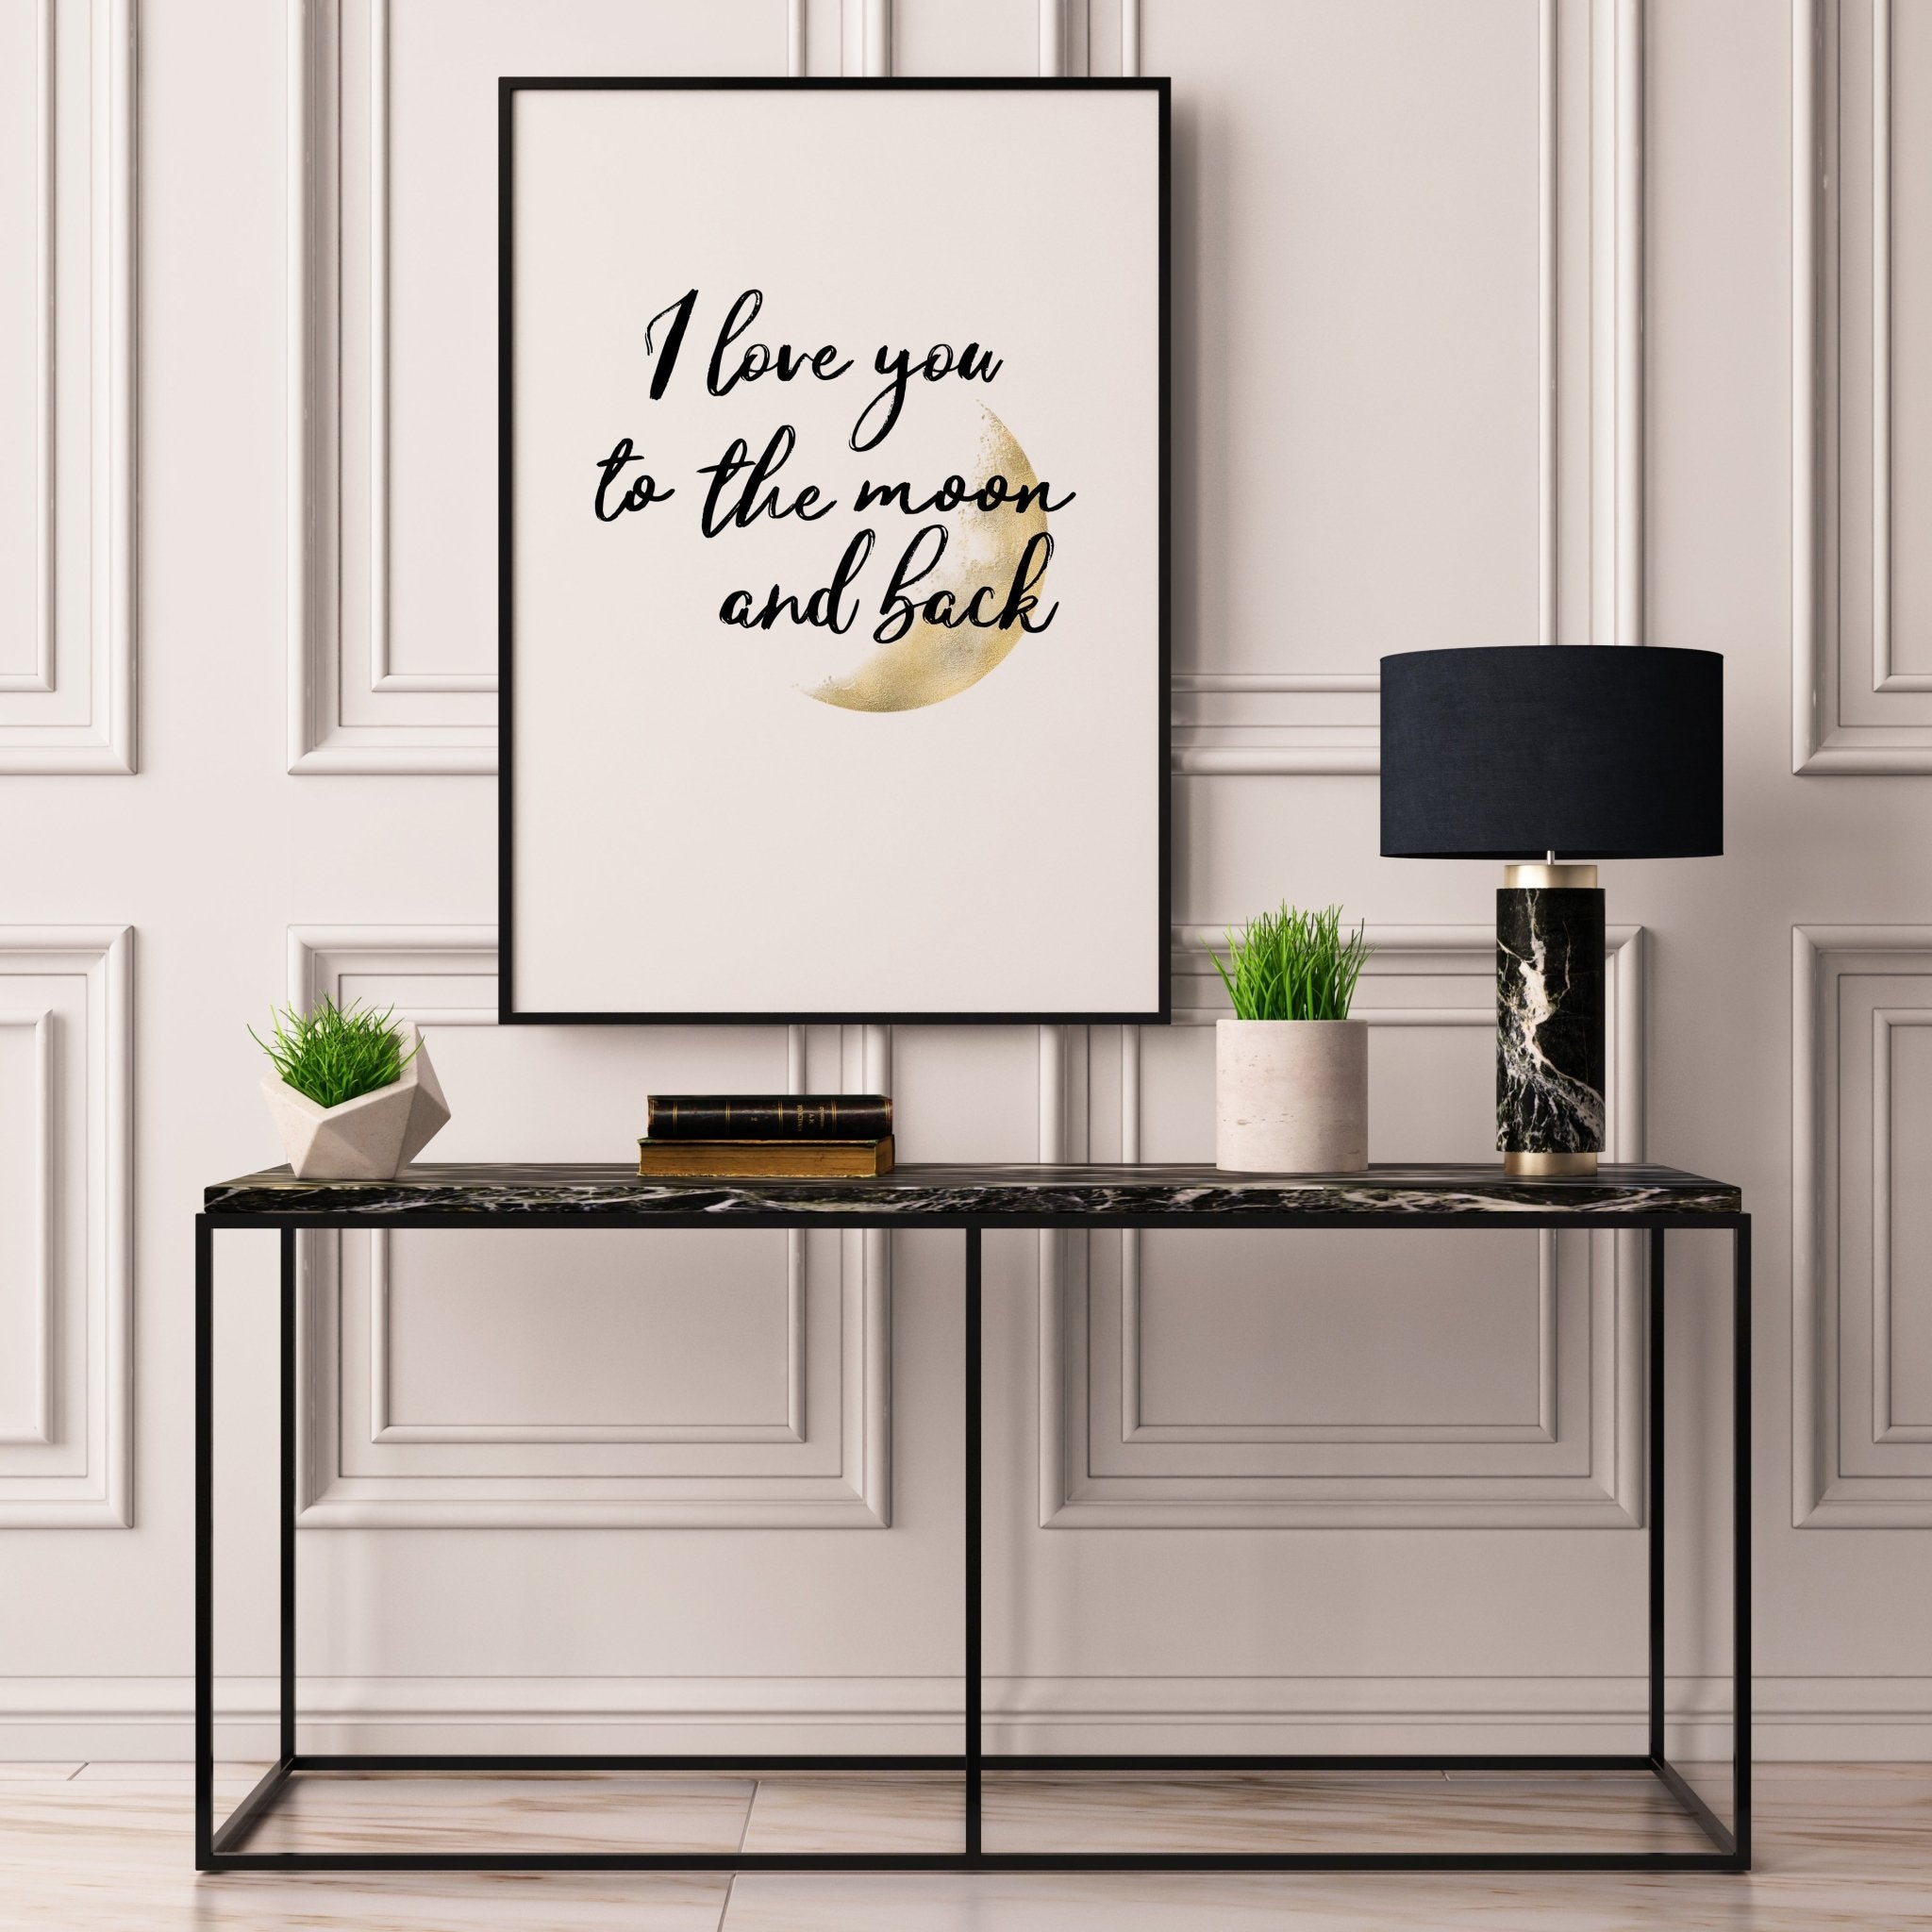 I Love You To The Moon And Back - D'Luxe Prints